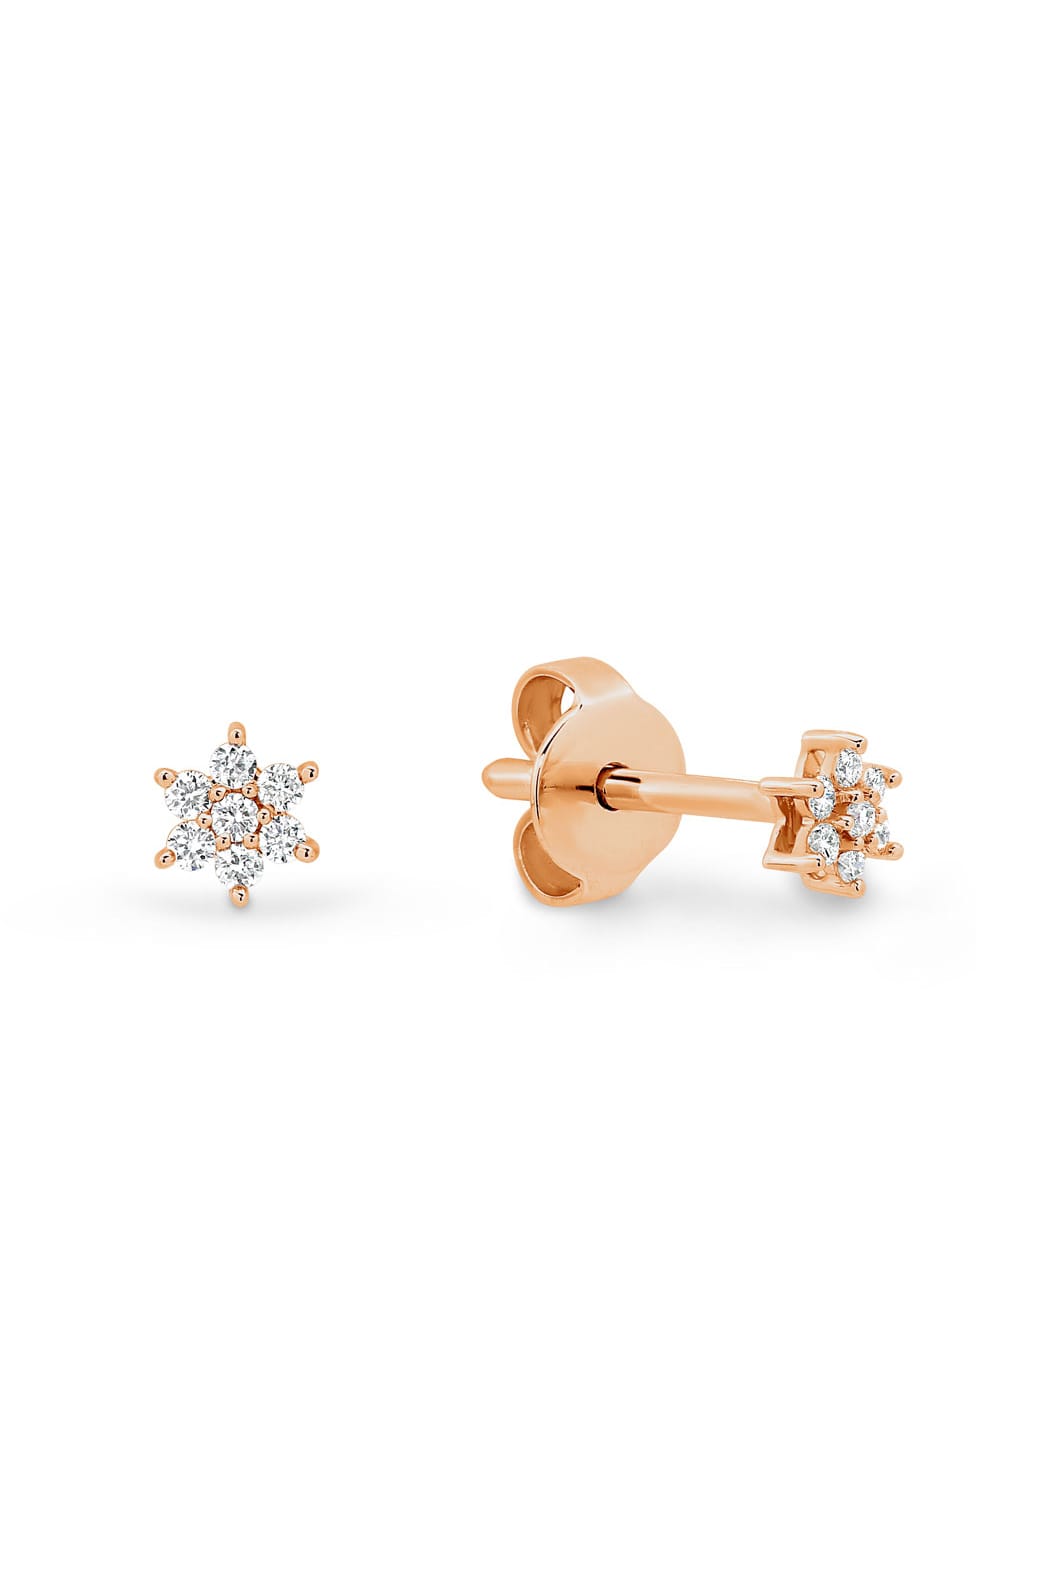 0.11ct Diamond Cluster Stud Earrings set in 9ct Rose Gold from LeGassick